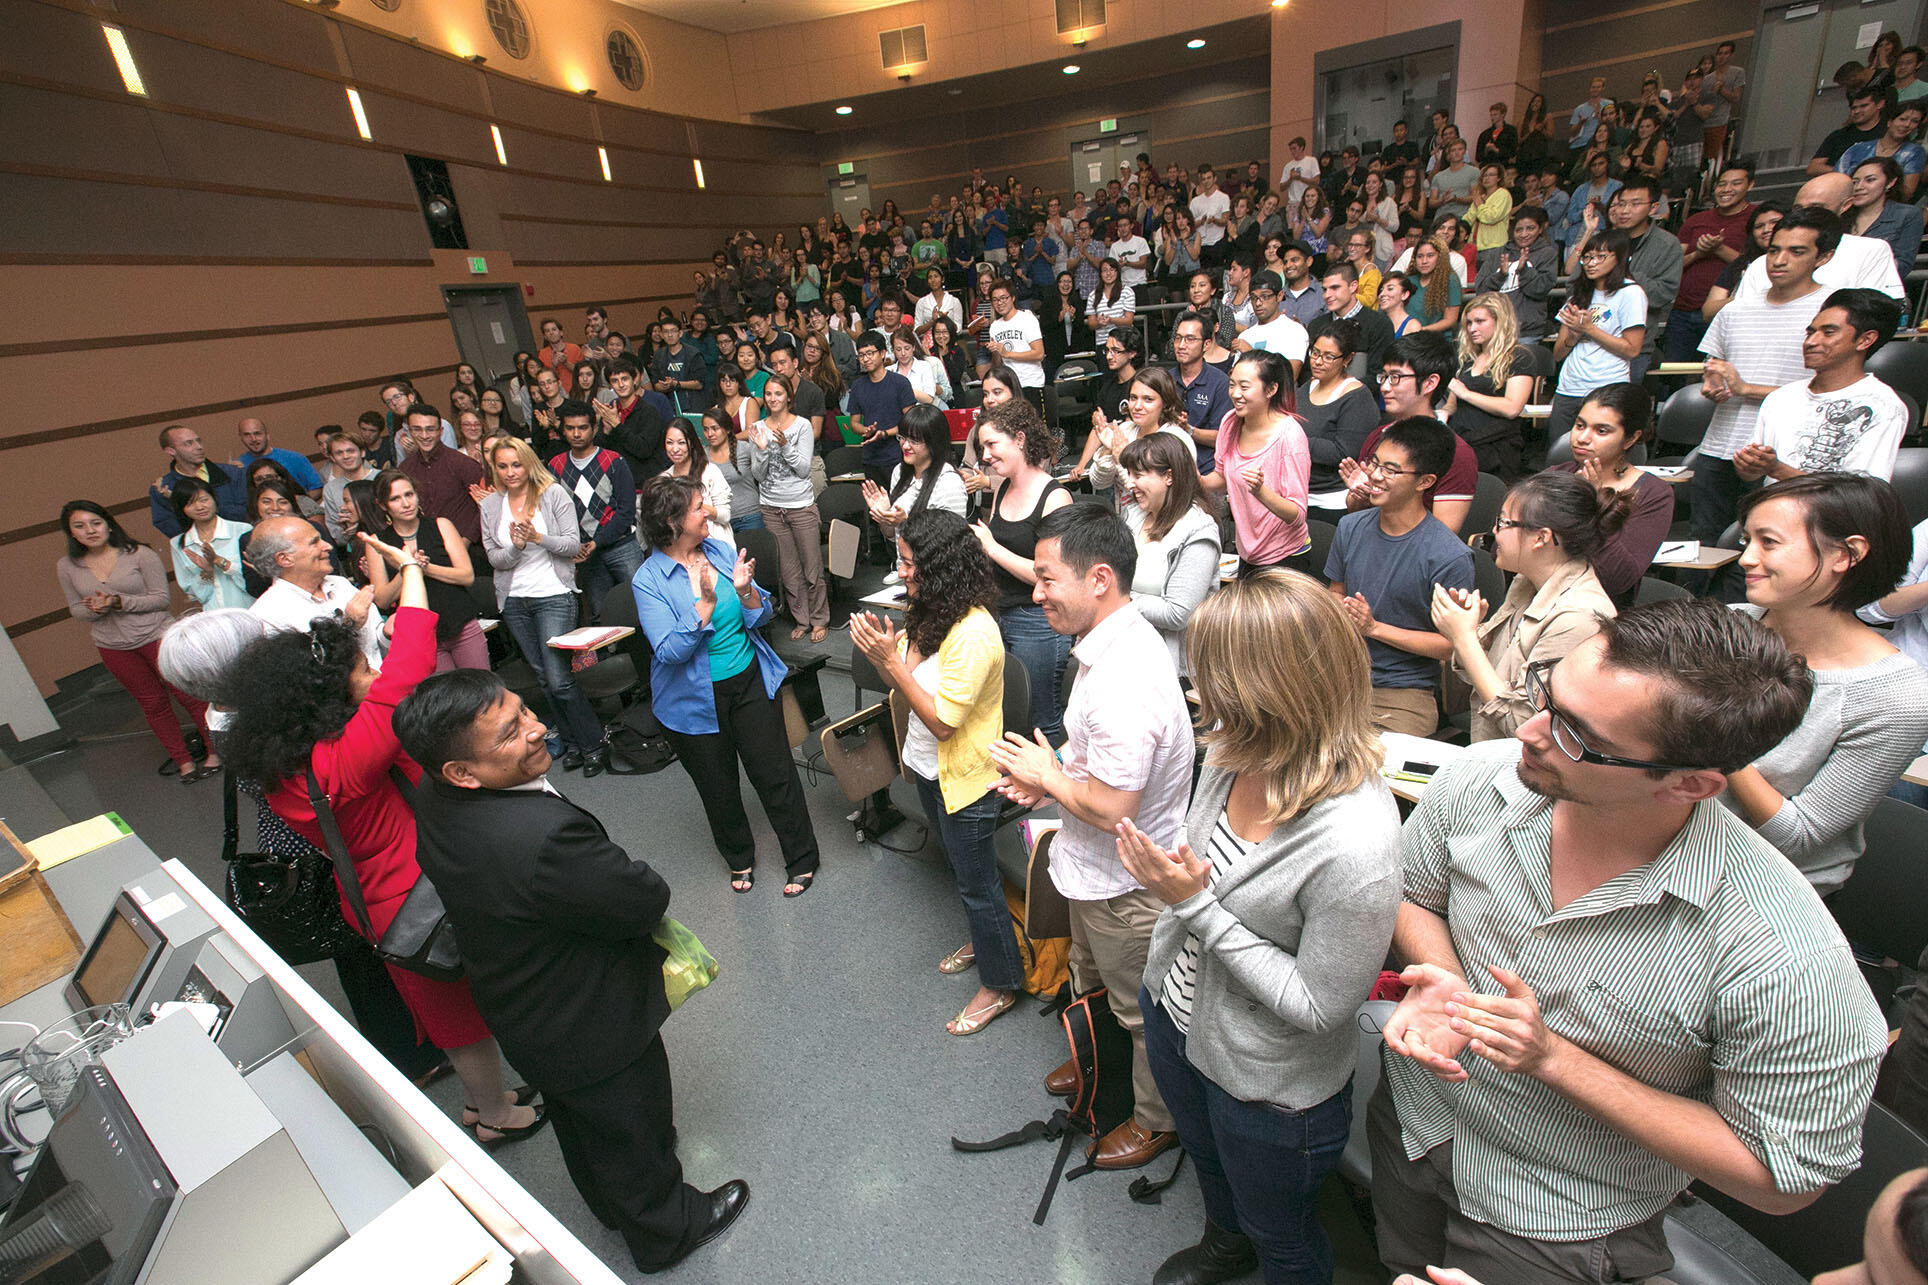 The judges receive a standing ovation from a classroom full of Berkeley students when they visit a class on campus. (Photo by Jim Block.)